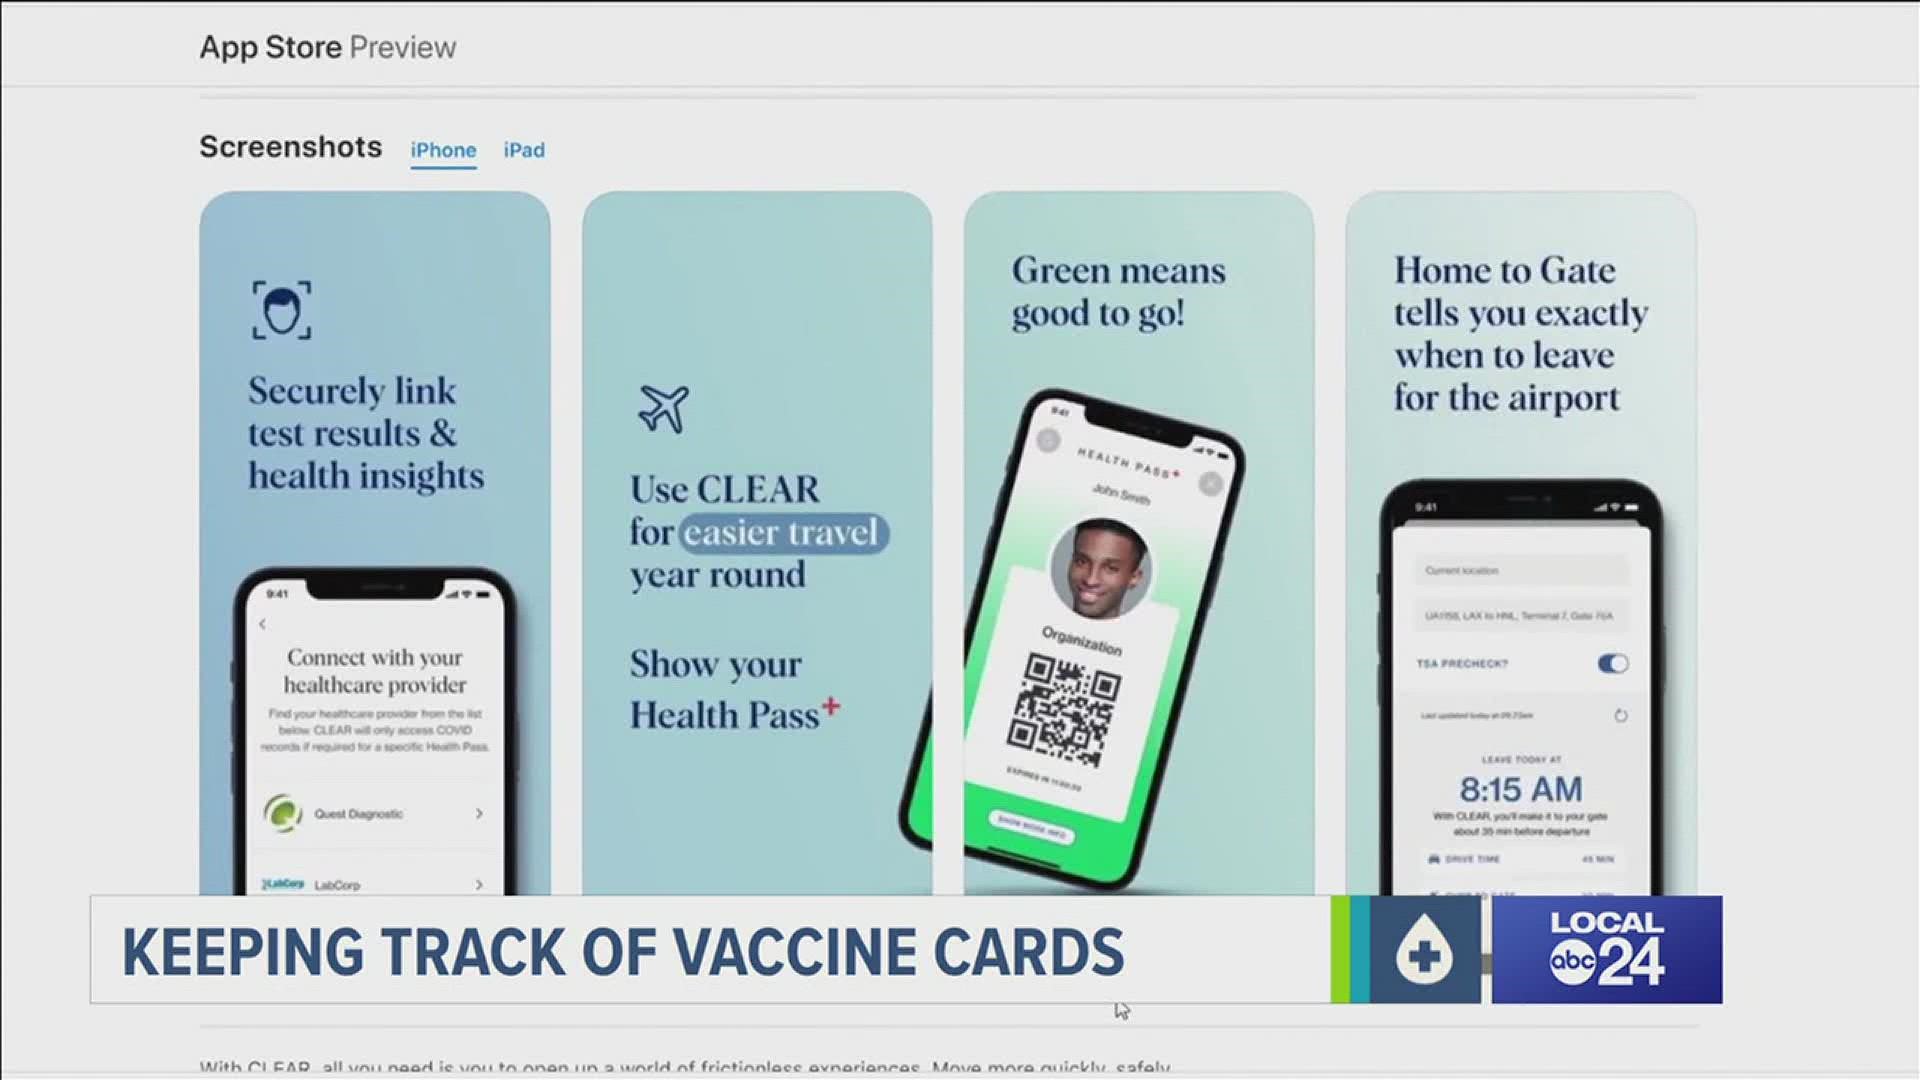 Pharmacy health wallet apps provide a safe stash for your card, while security app CLEAR offers an easy 3 step process in uploading your vaccination card.